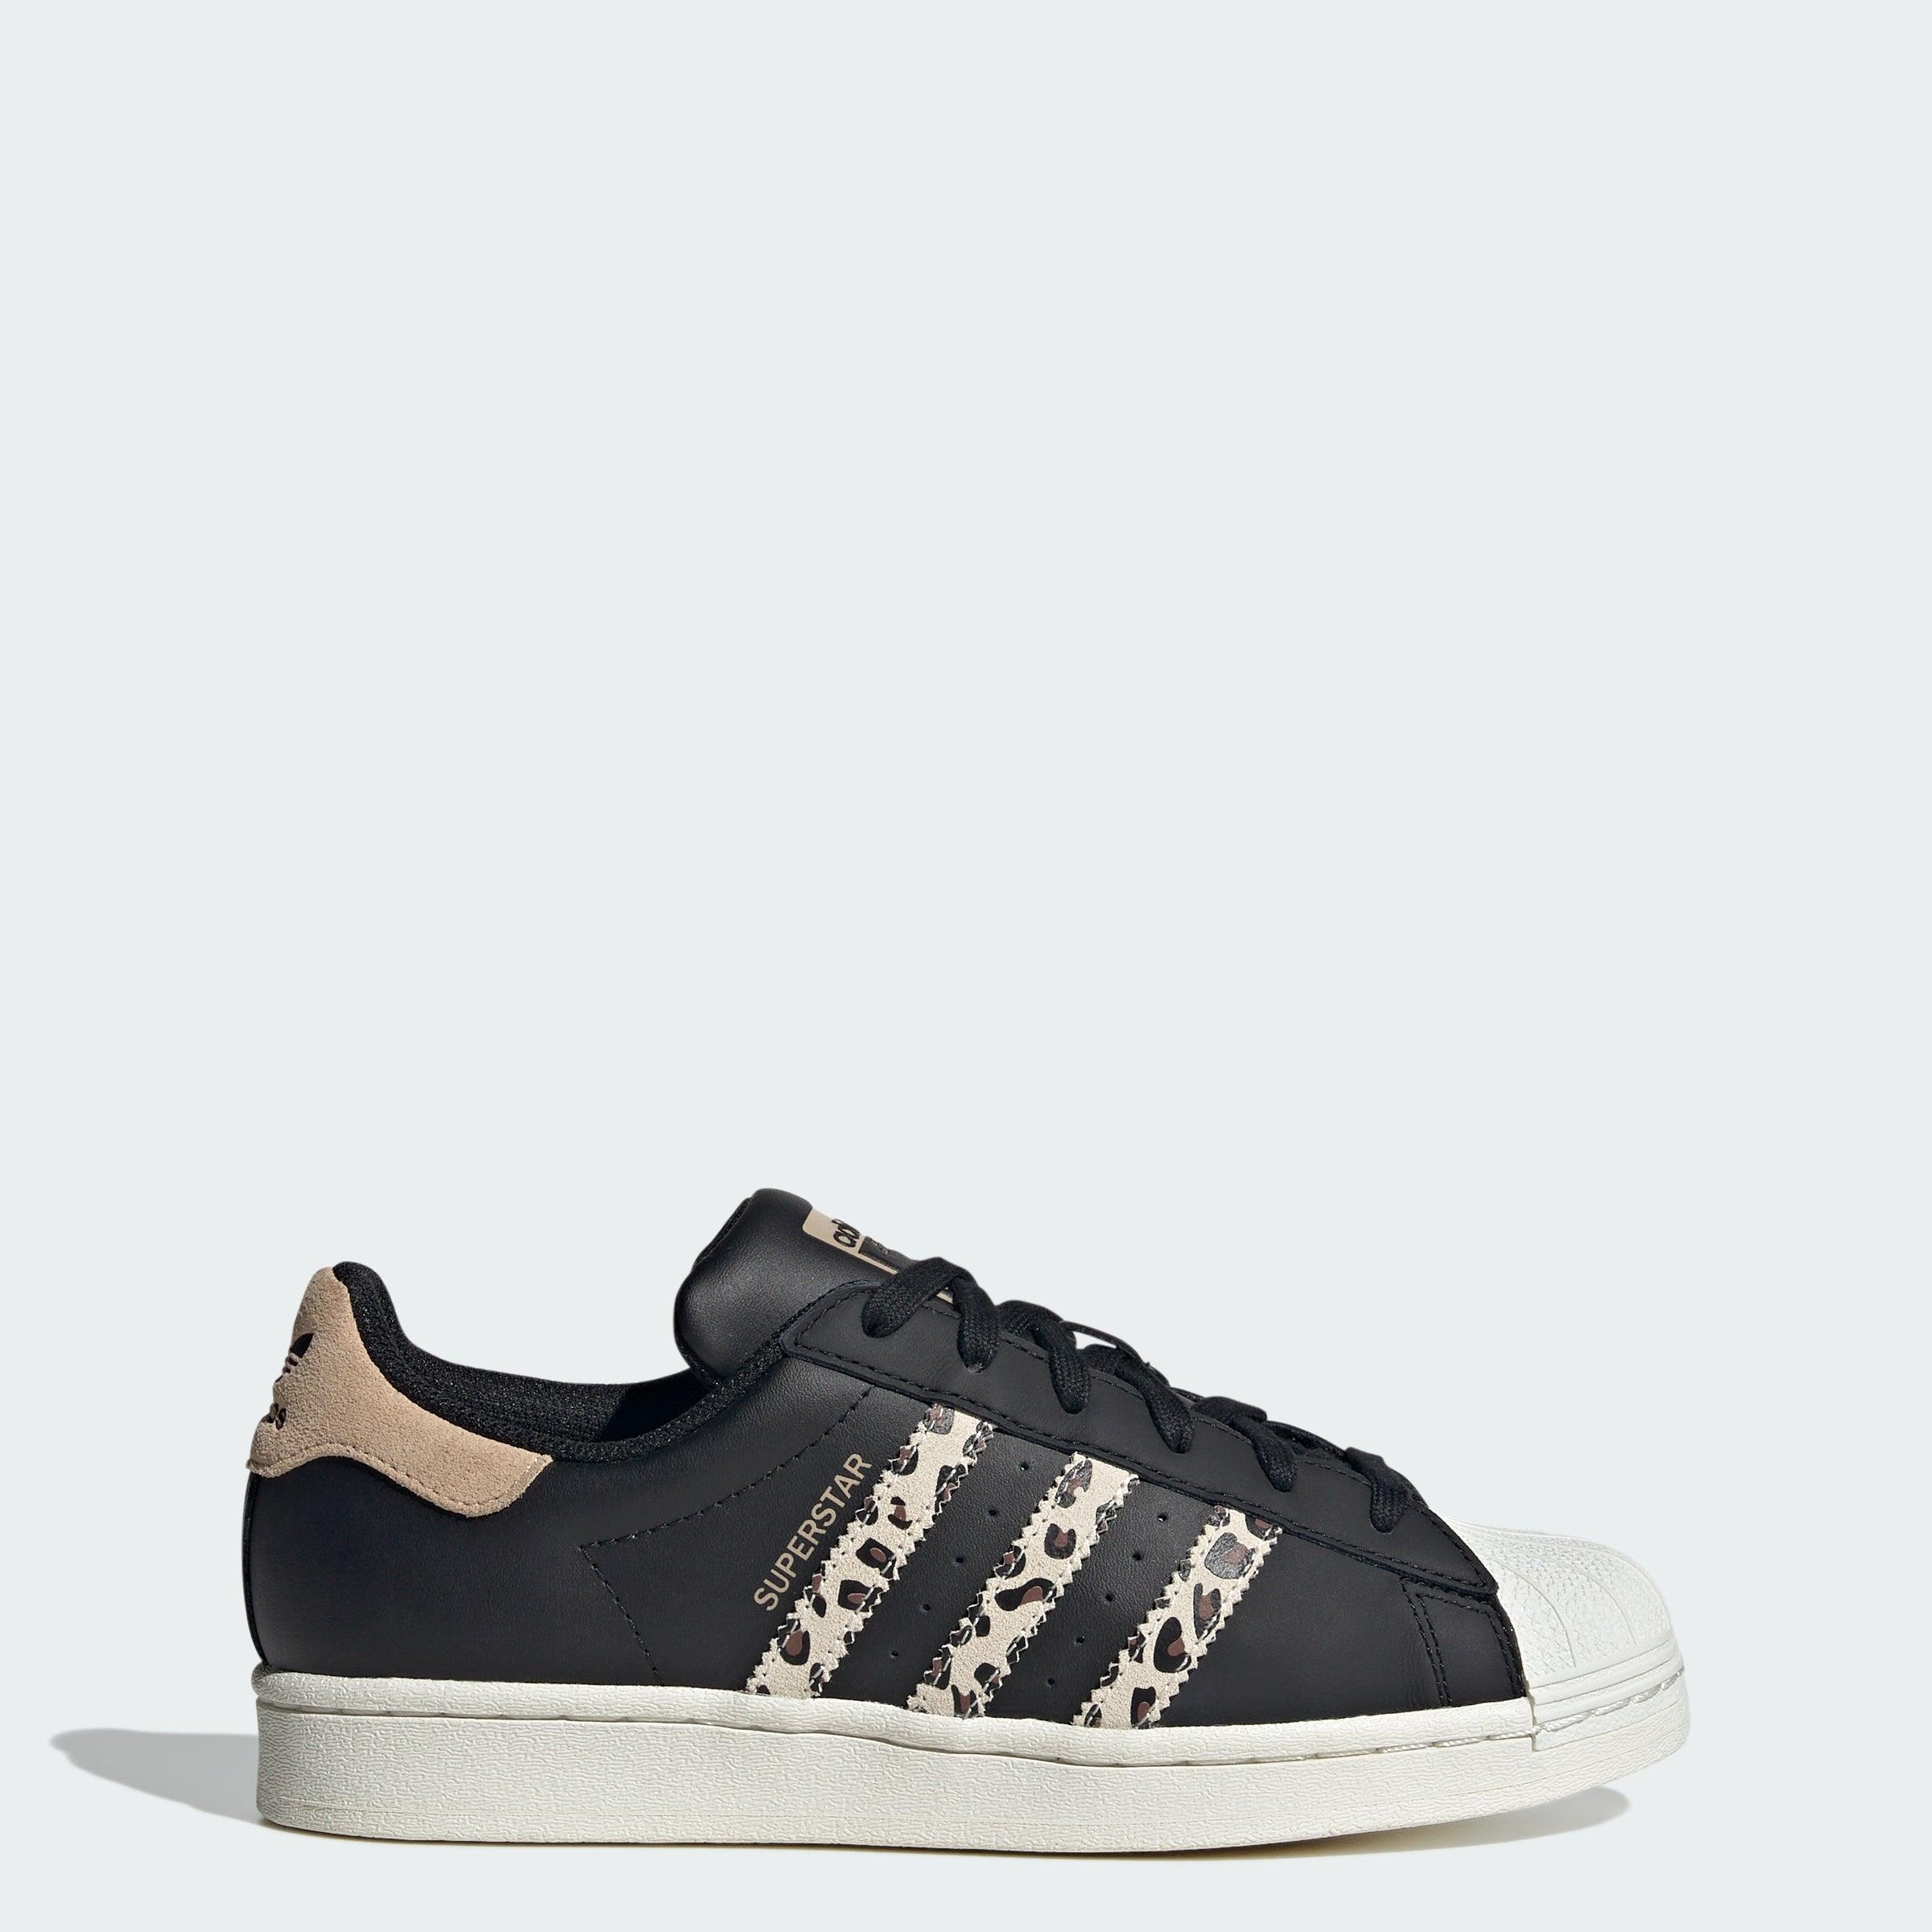 adidas Superstar Shoes in Black | Lyst